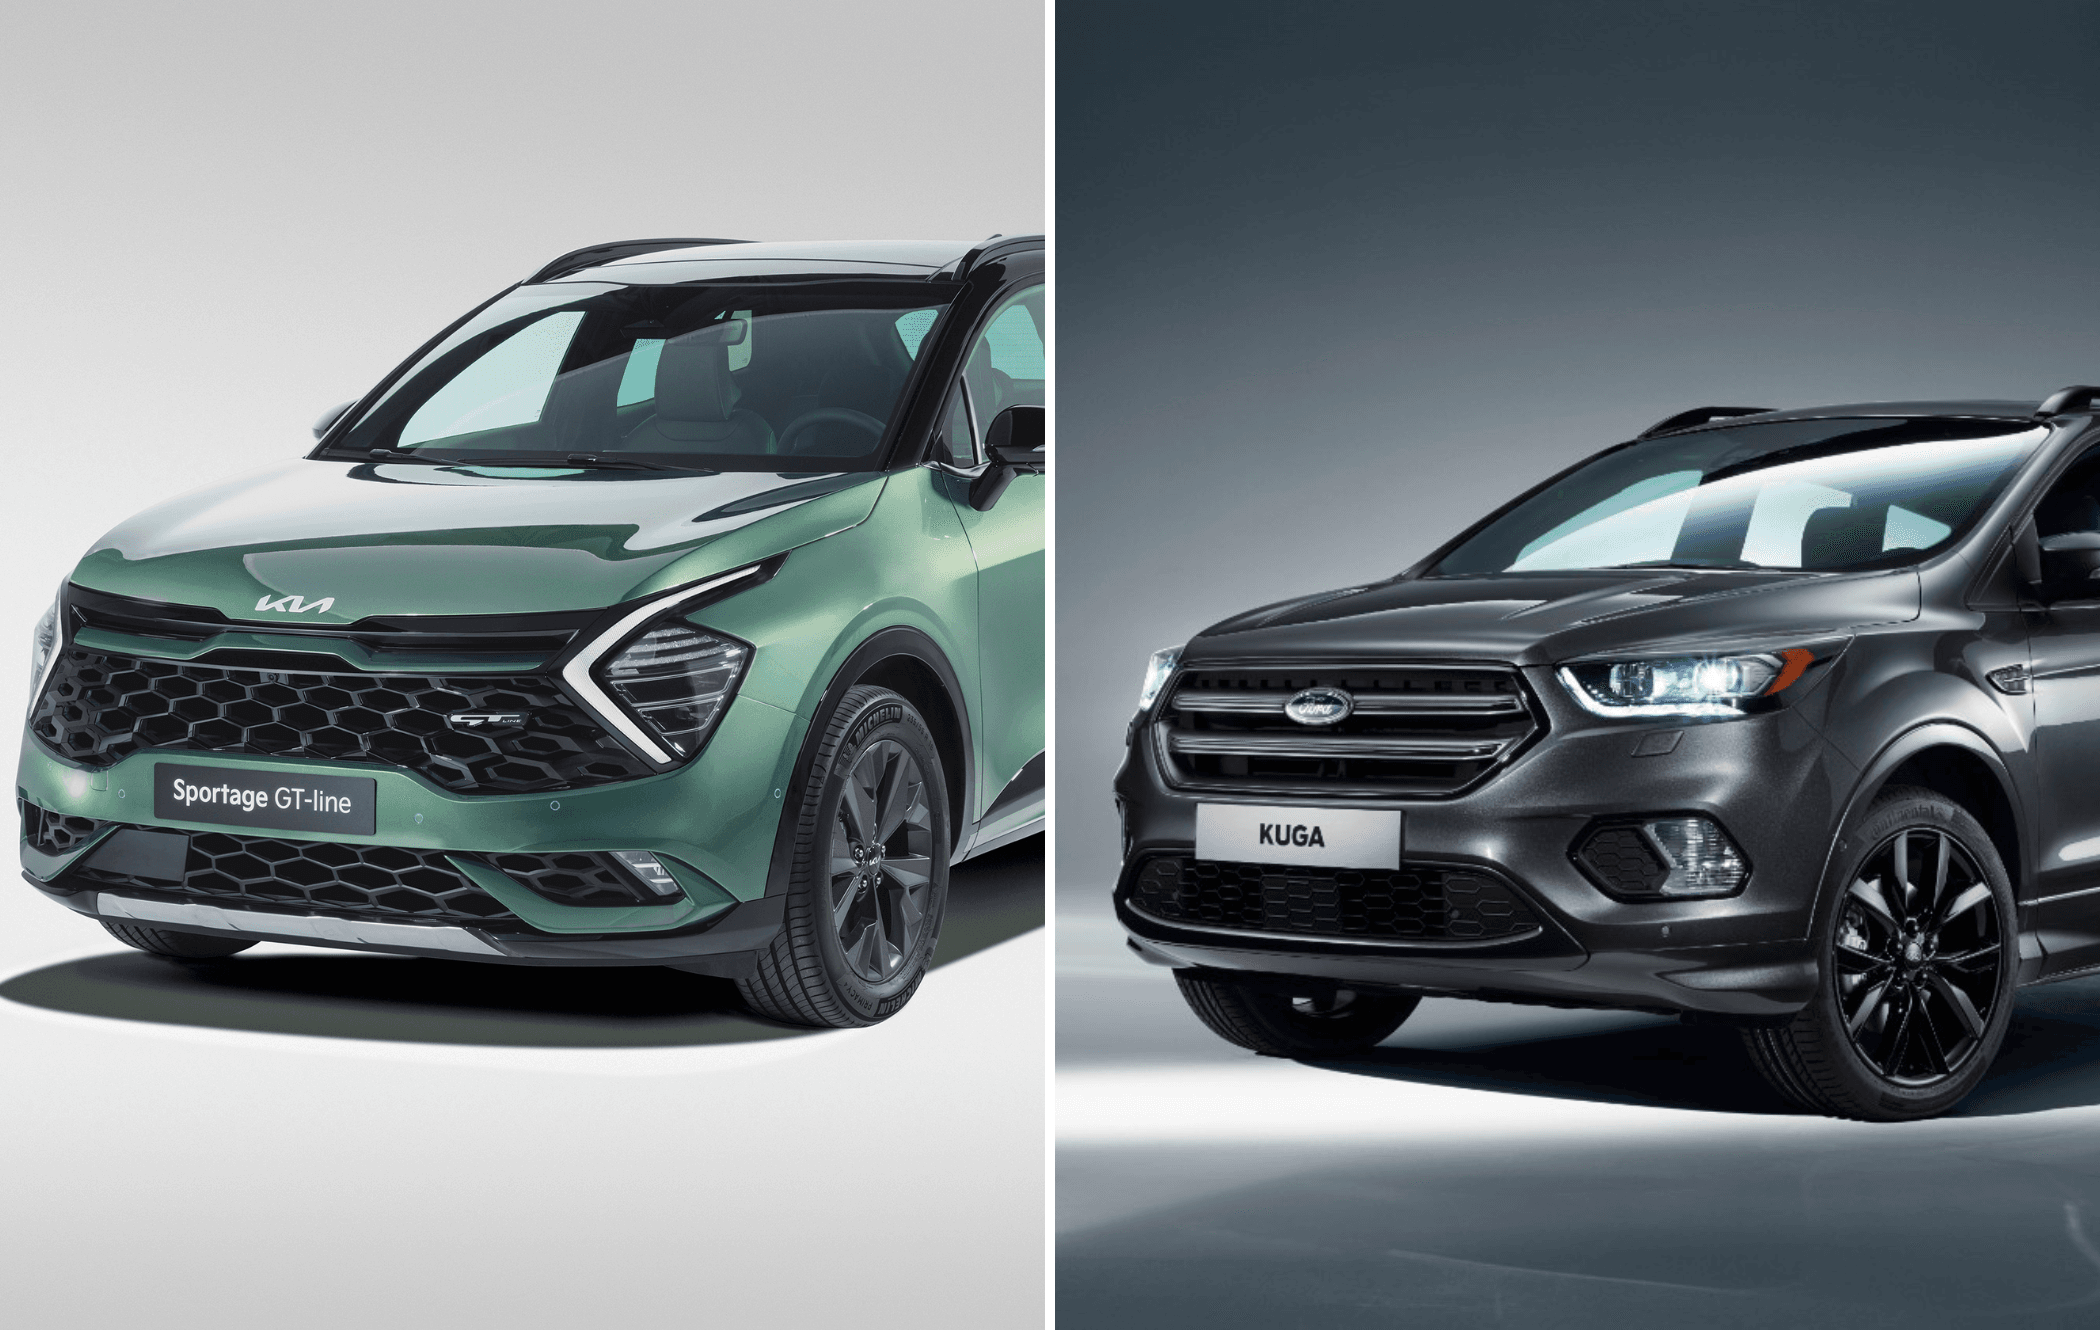 on the left is a green kia sportage and on the right is a grey ford kuga